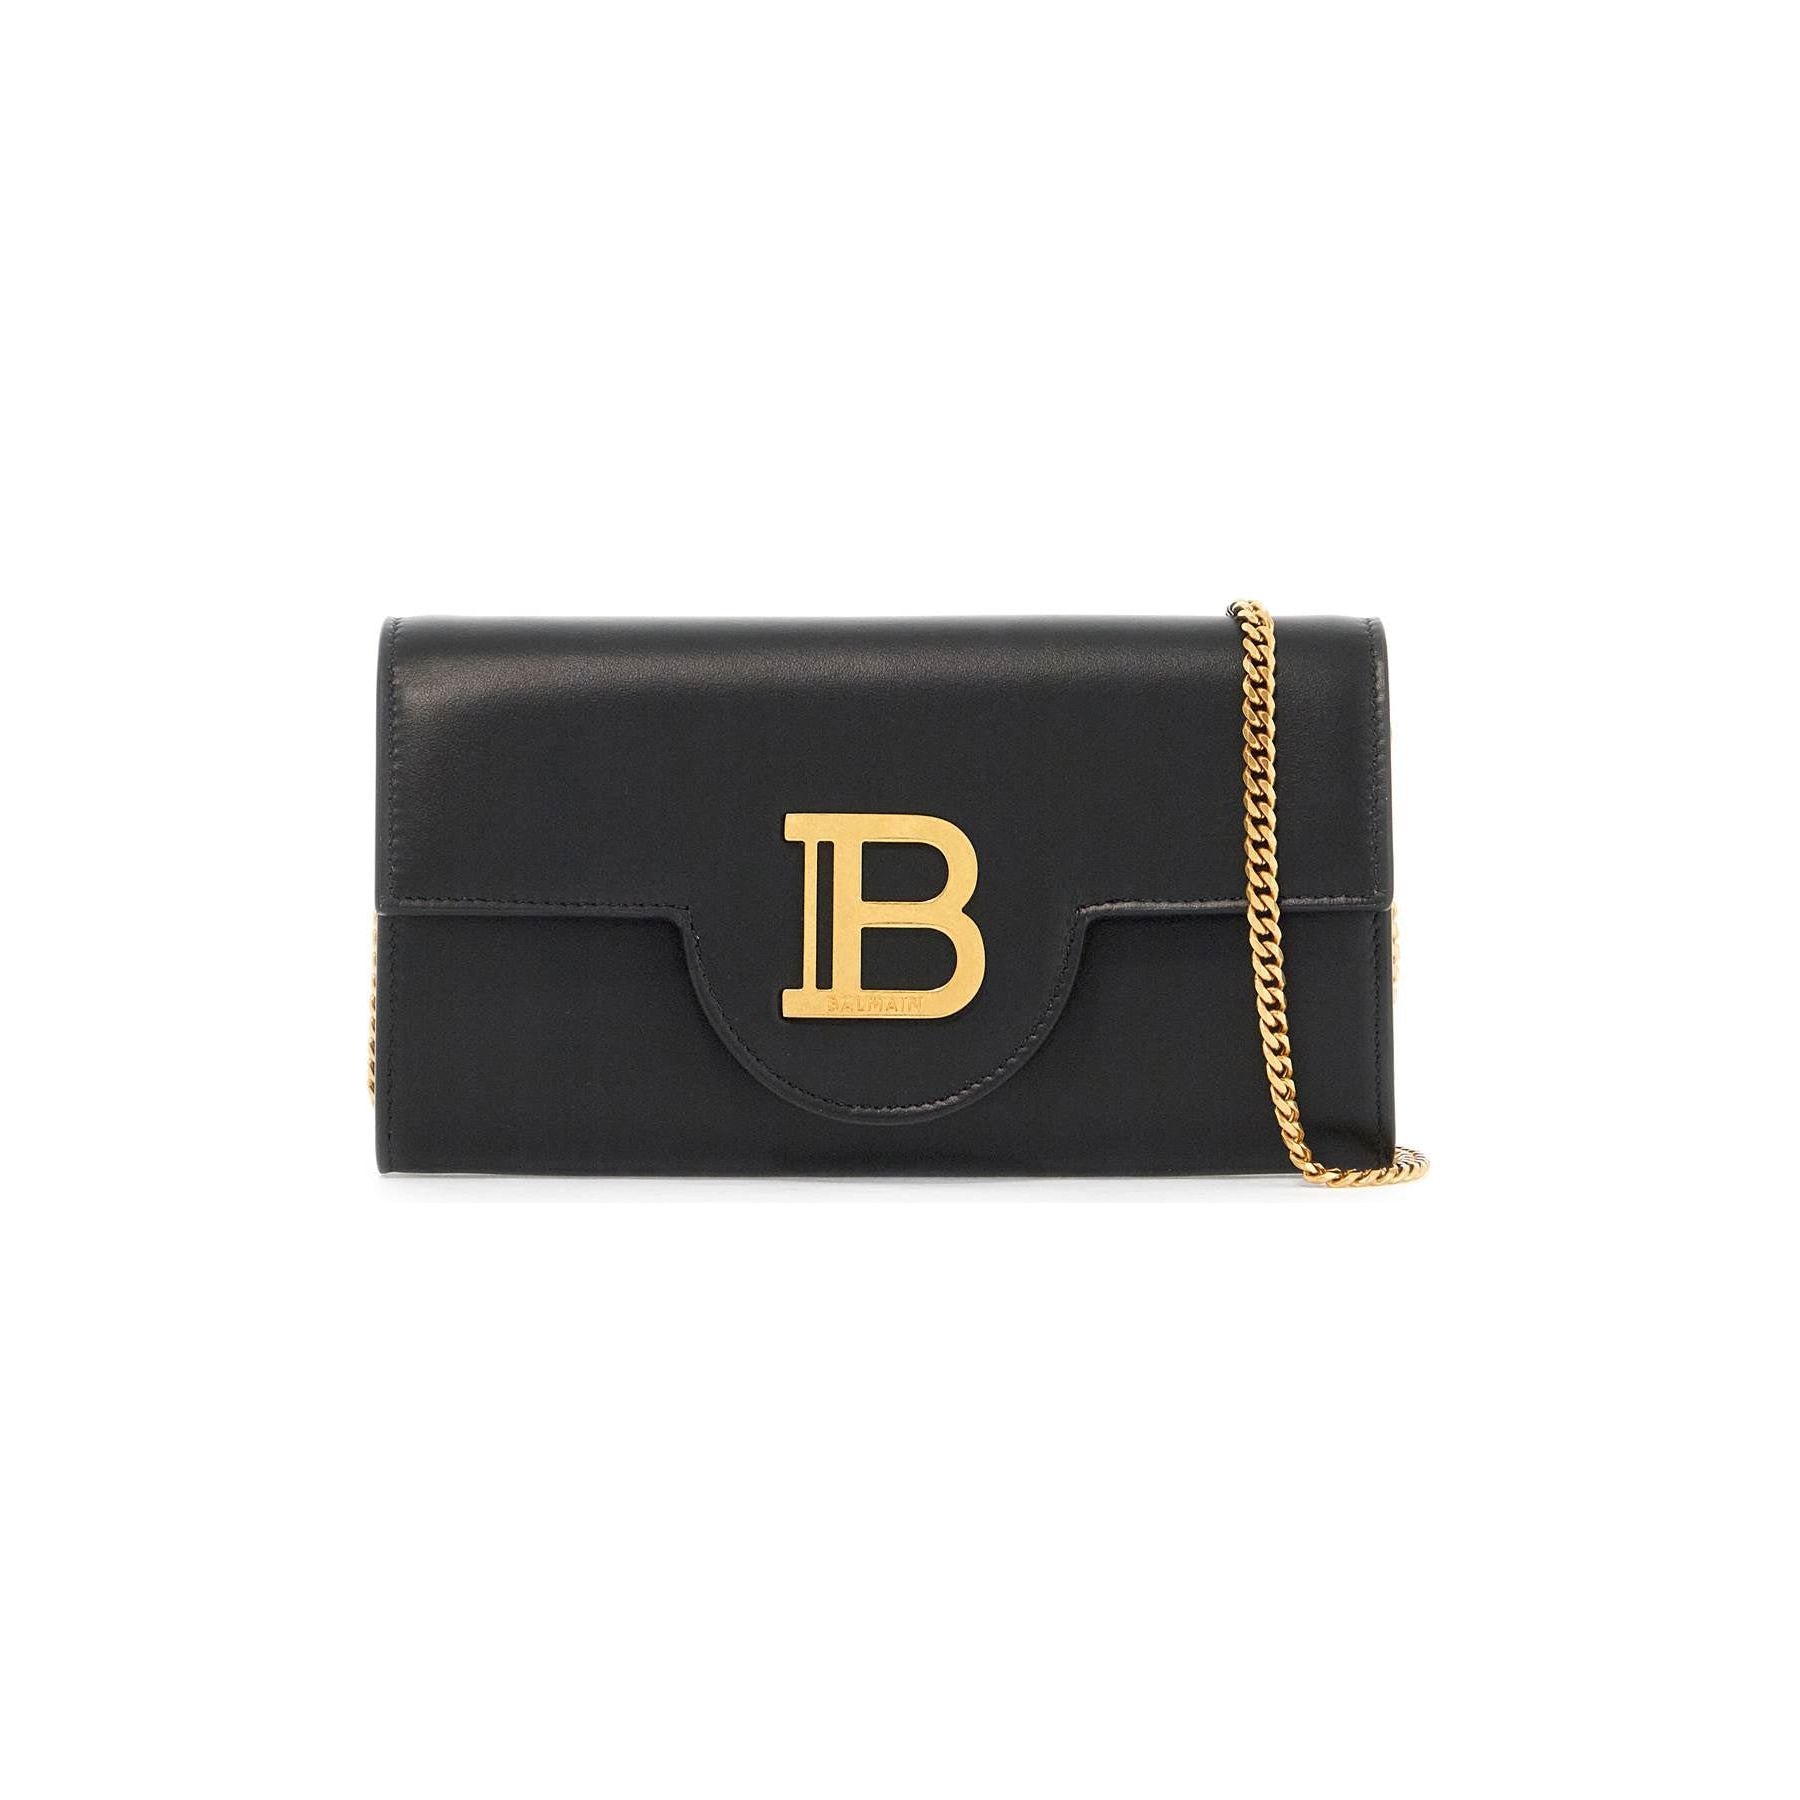 B-Buzz Calfskin Leather Wallet on a Chain